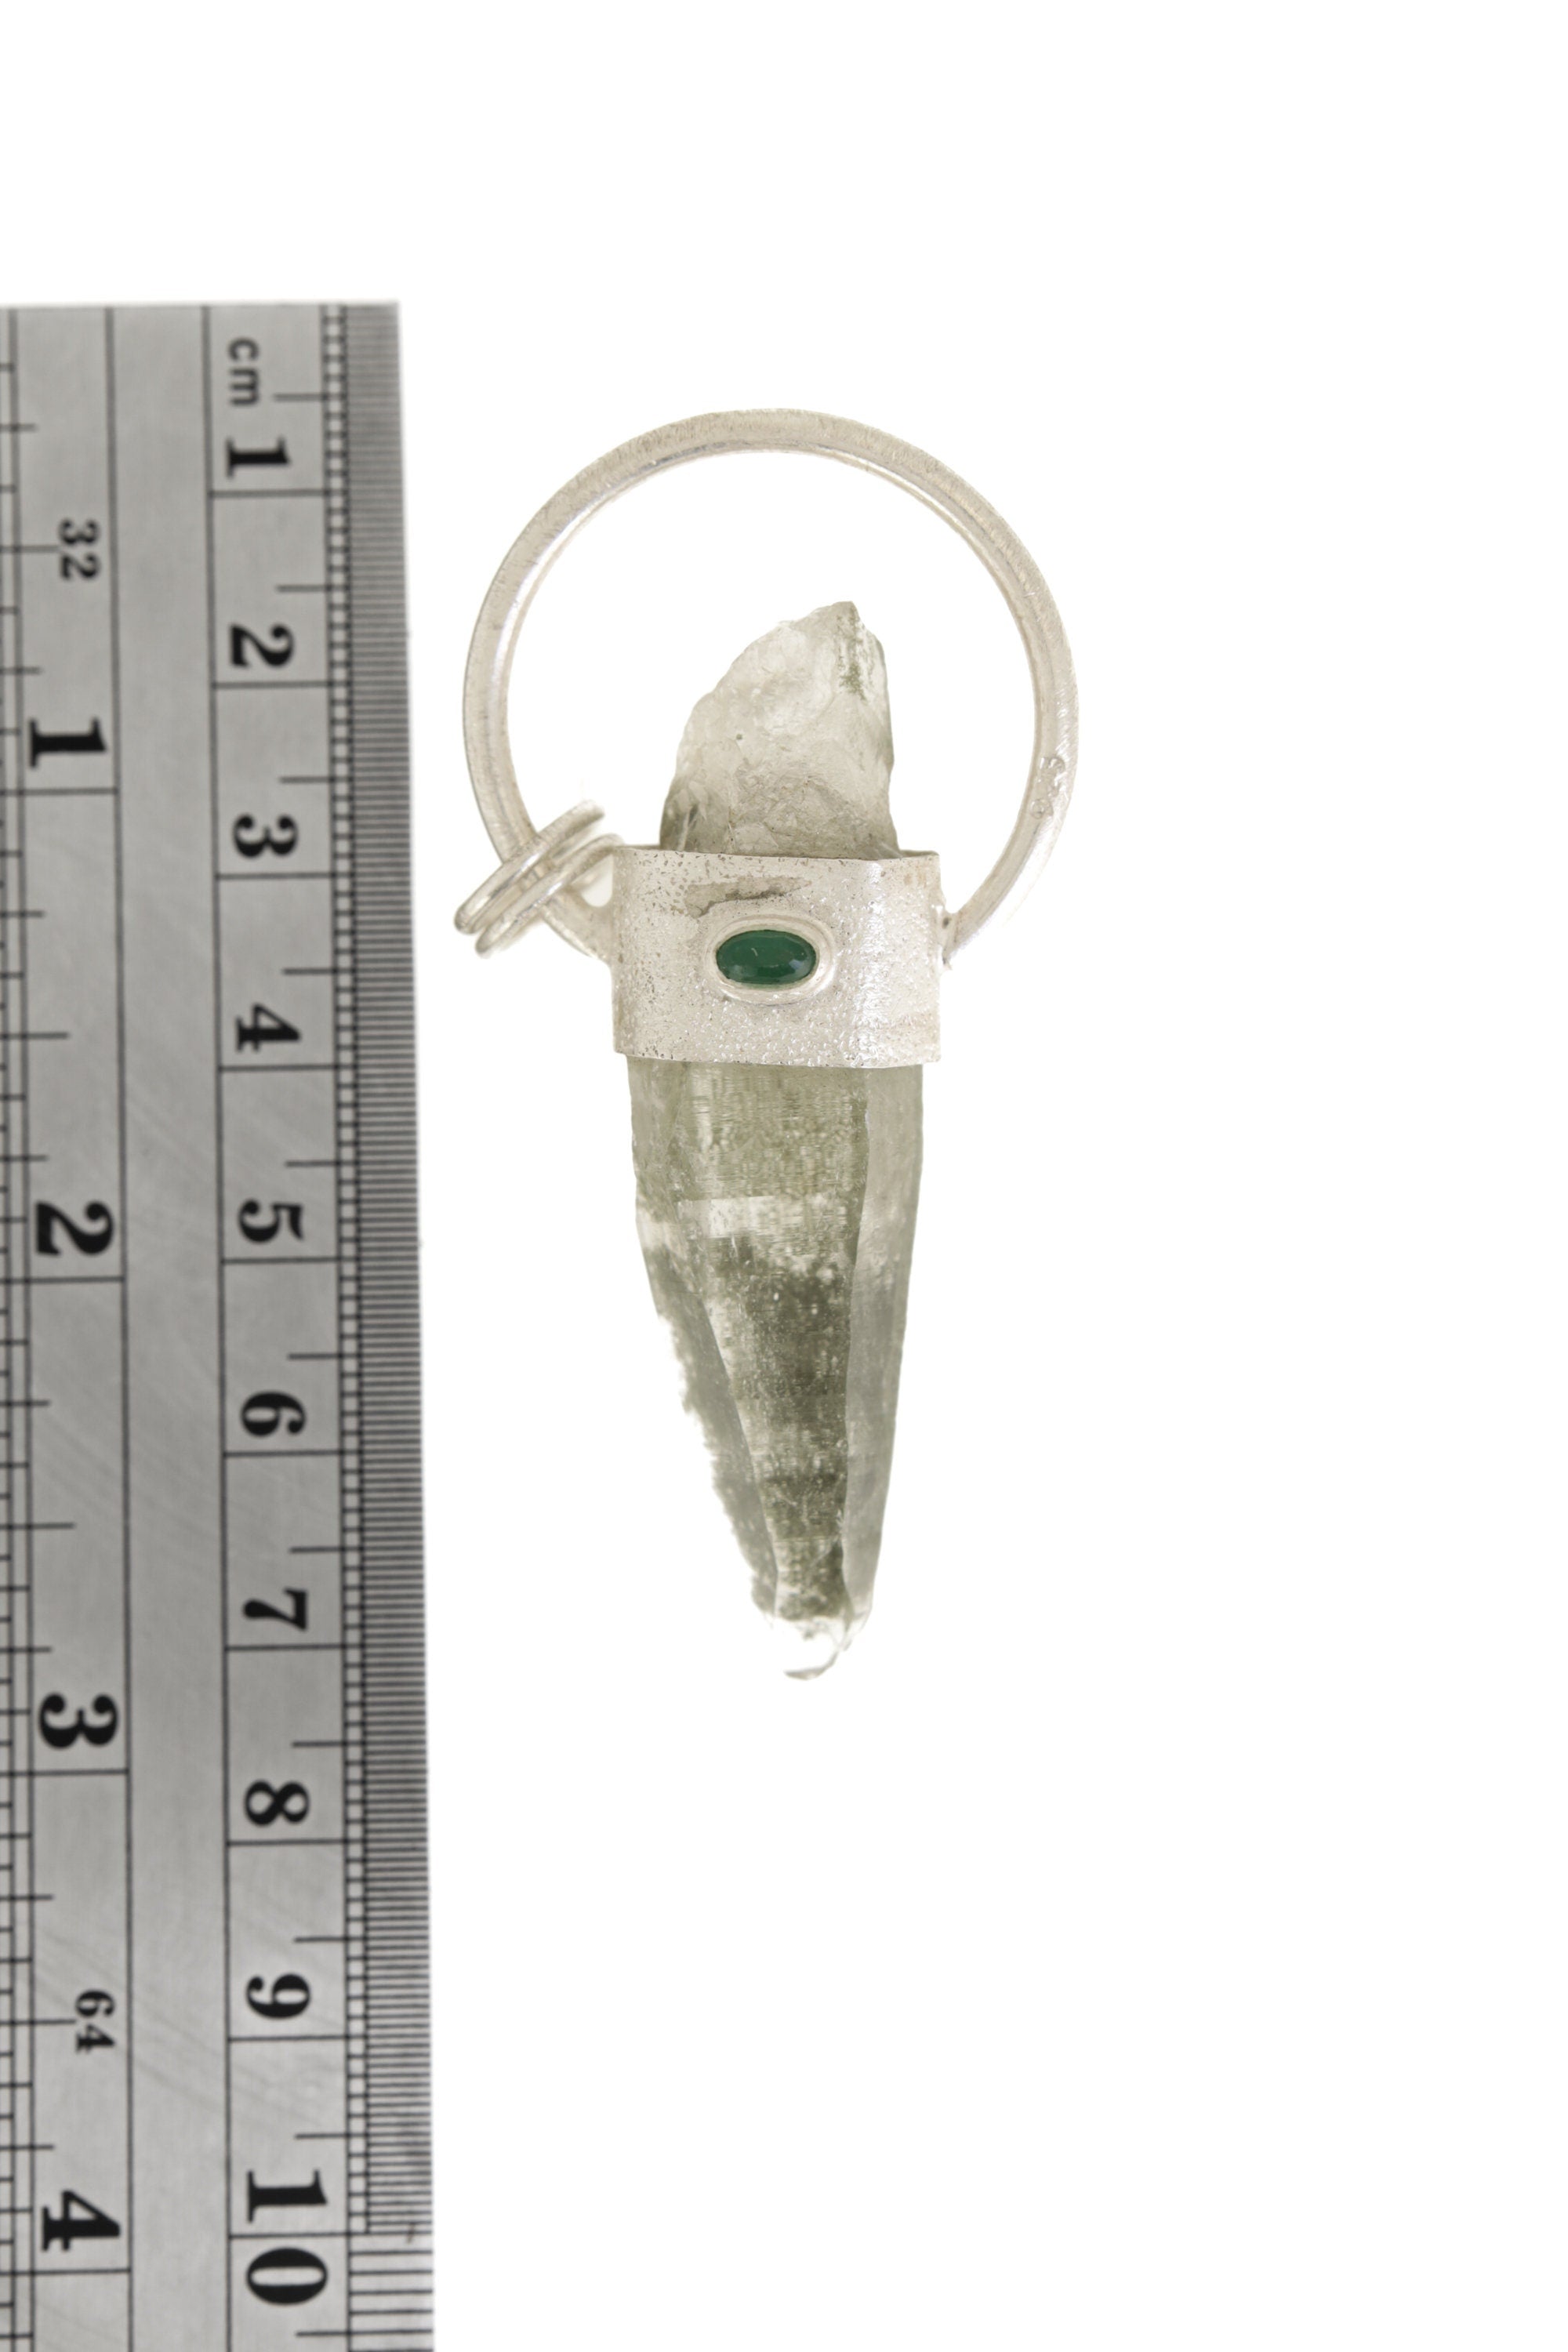 Emerald Healer: Sterling Silver Sand-Textured Crystal Pendant with Self-Healed Lemurian Chlorite Quartz and Emerald